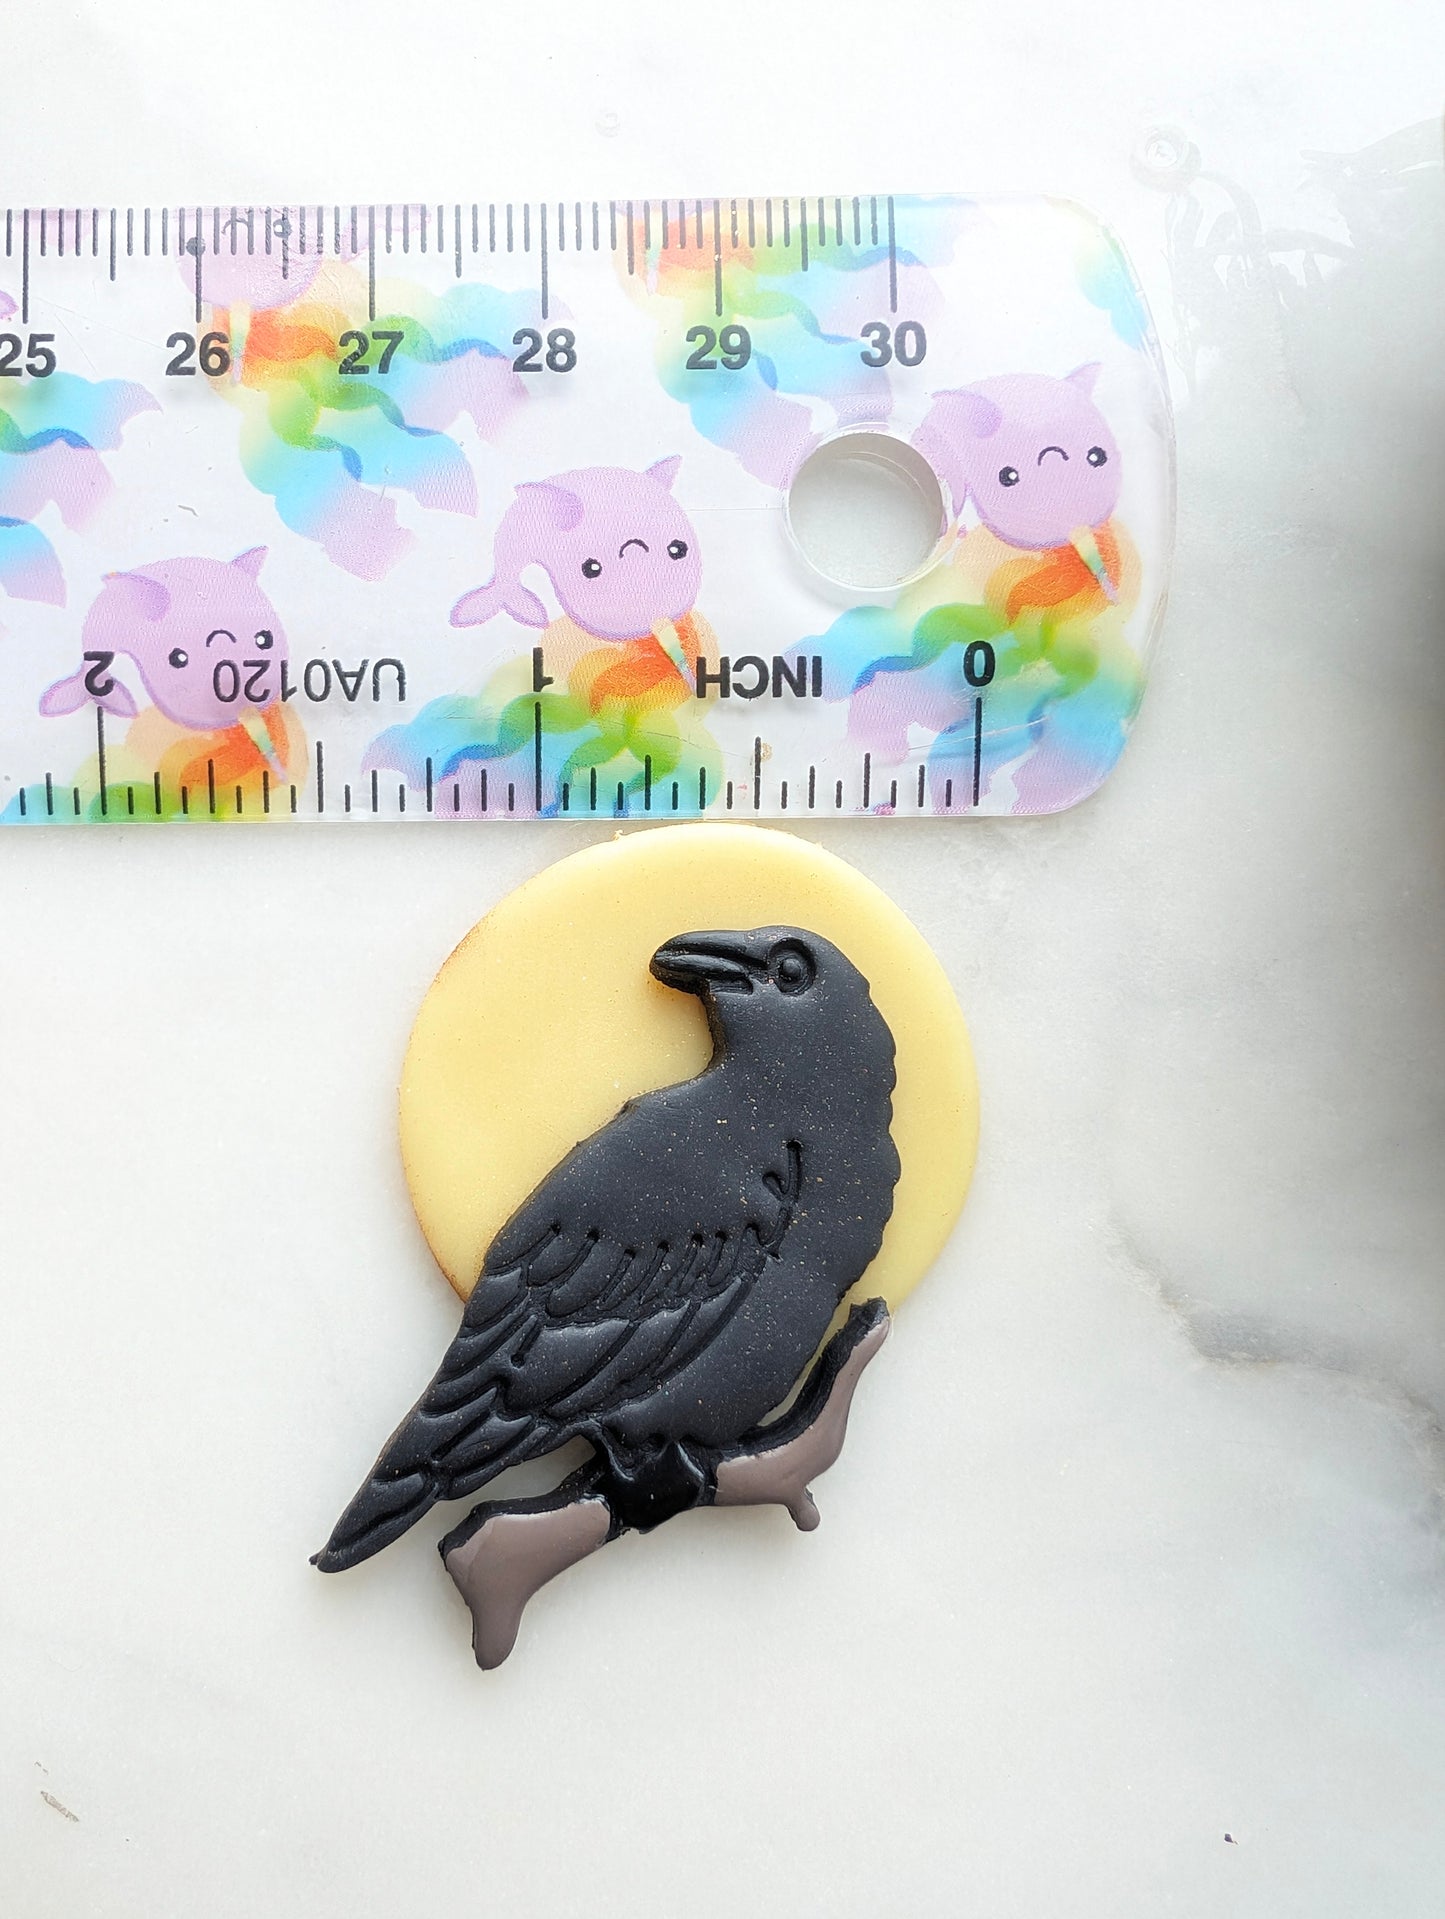 Raven on Branch with Full Moon Sharp Clay Cutter